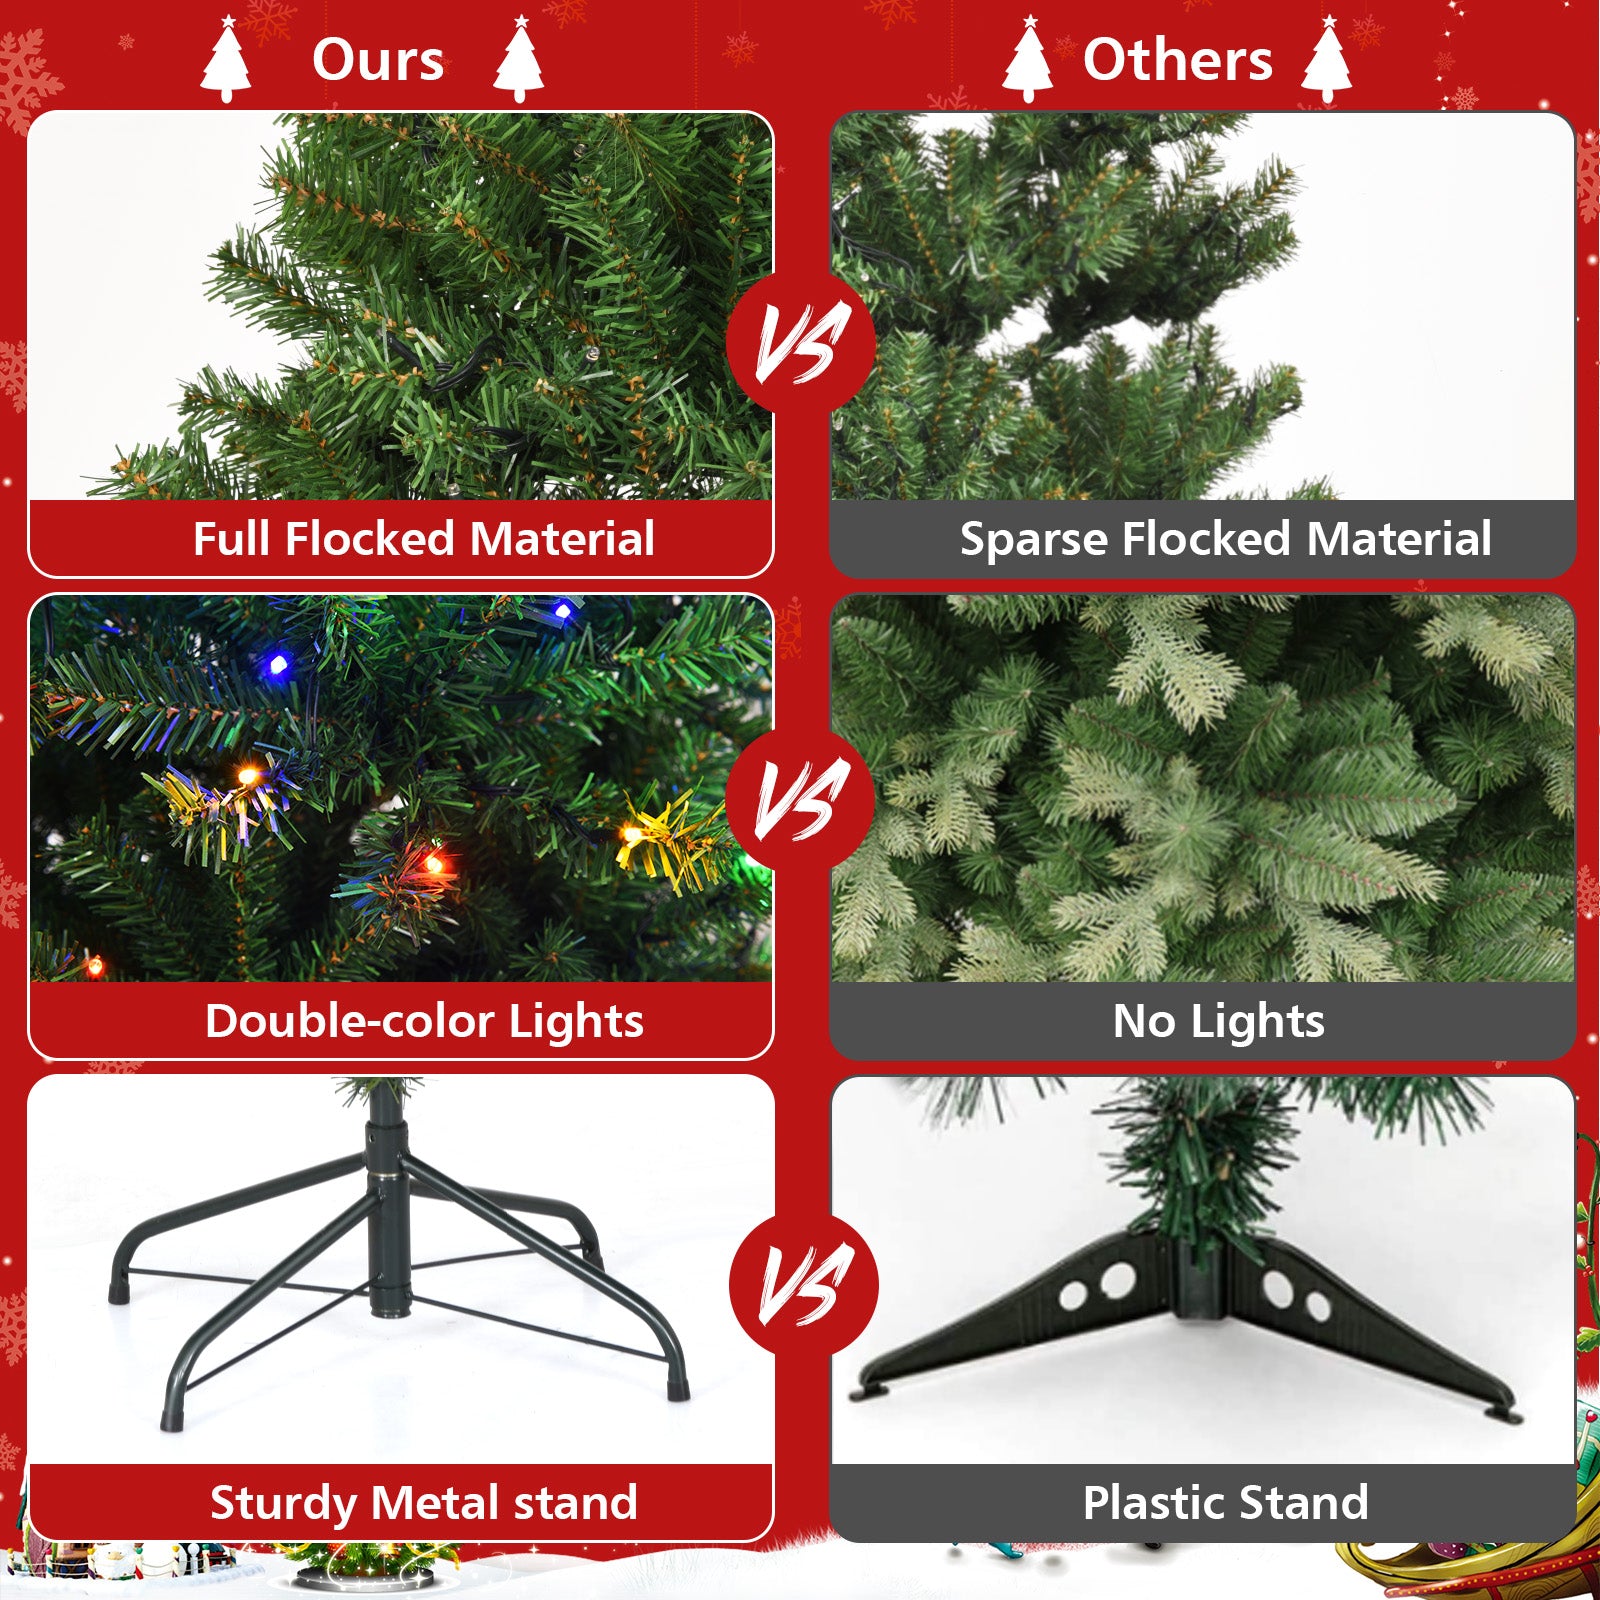 Chairliving Pre-Lit Artificial Christmas Tree Auto-Spread/Close up Branches 11 Flash Modes with Multicolored 150 LED Lights and Metal Stand